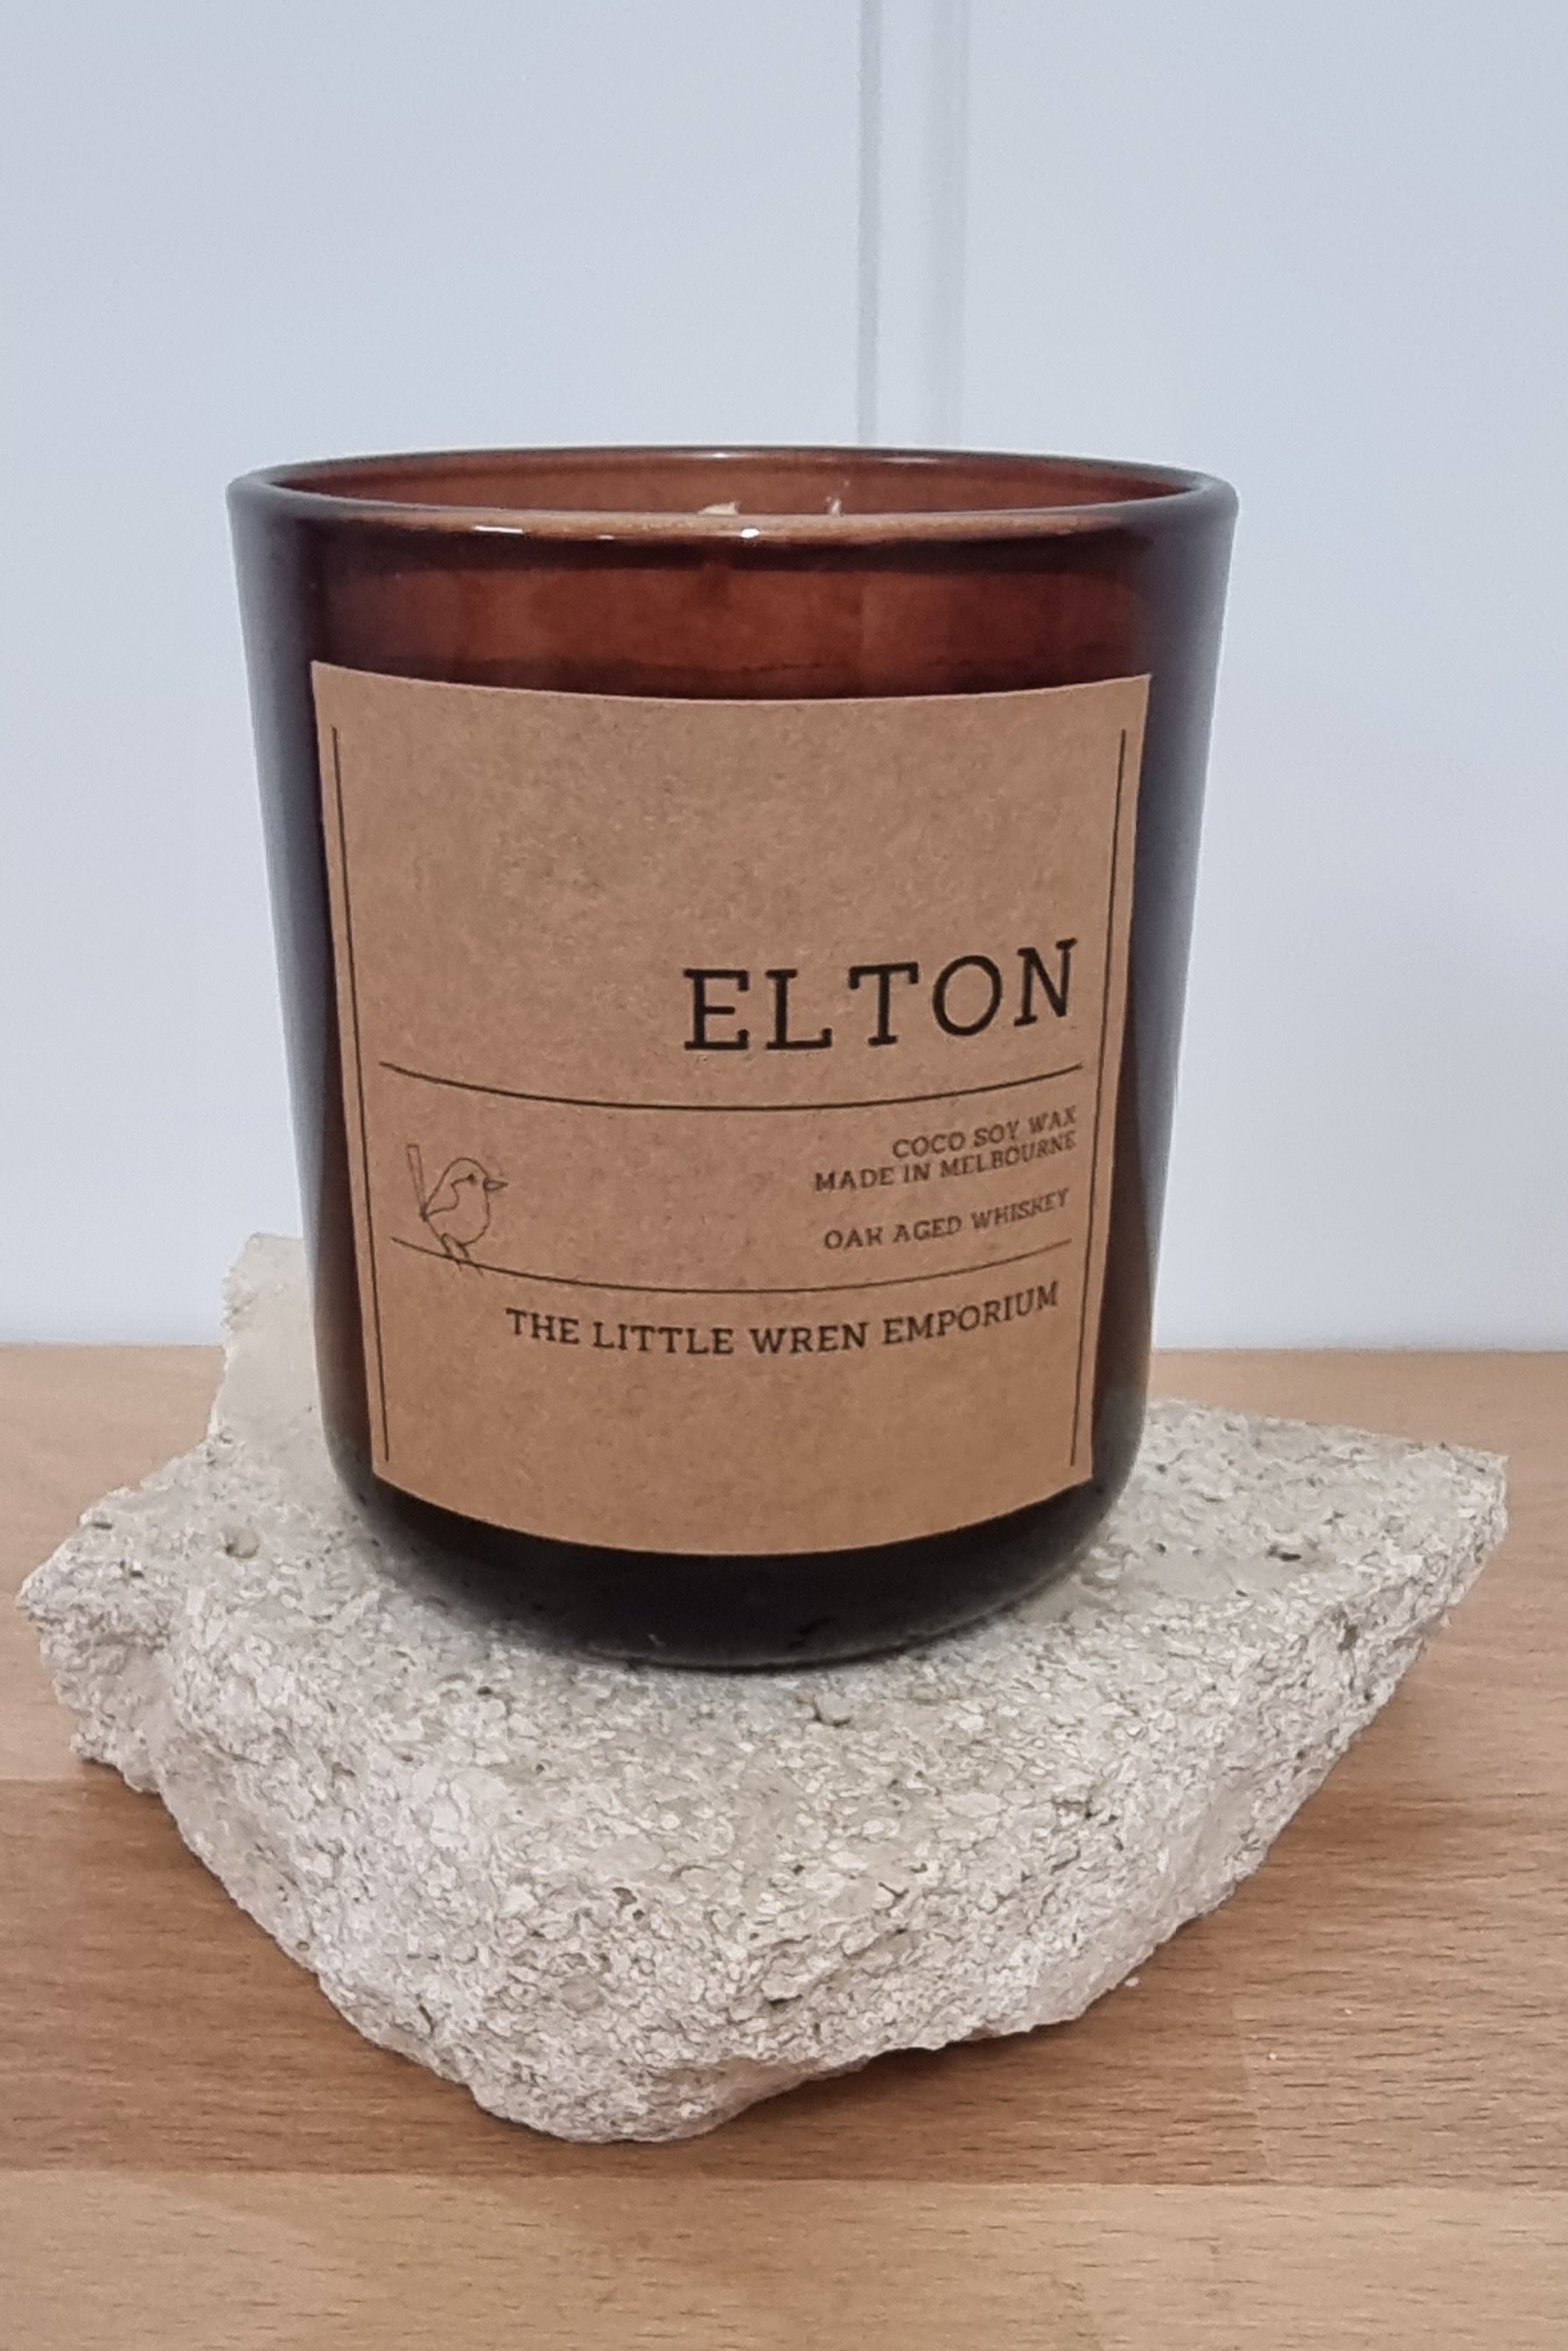 Elton - Hand Poured Coco Soy Candle